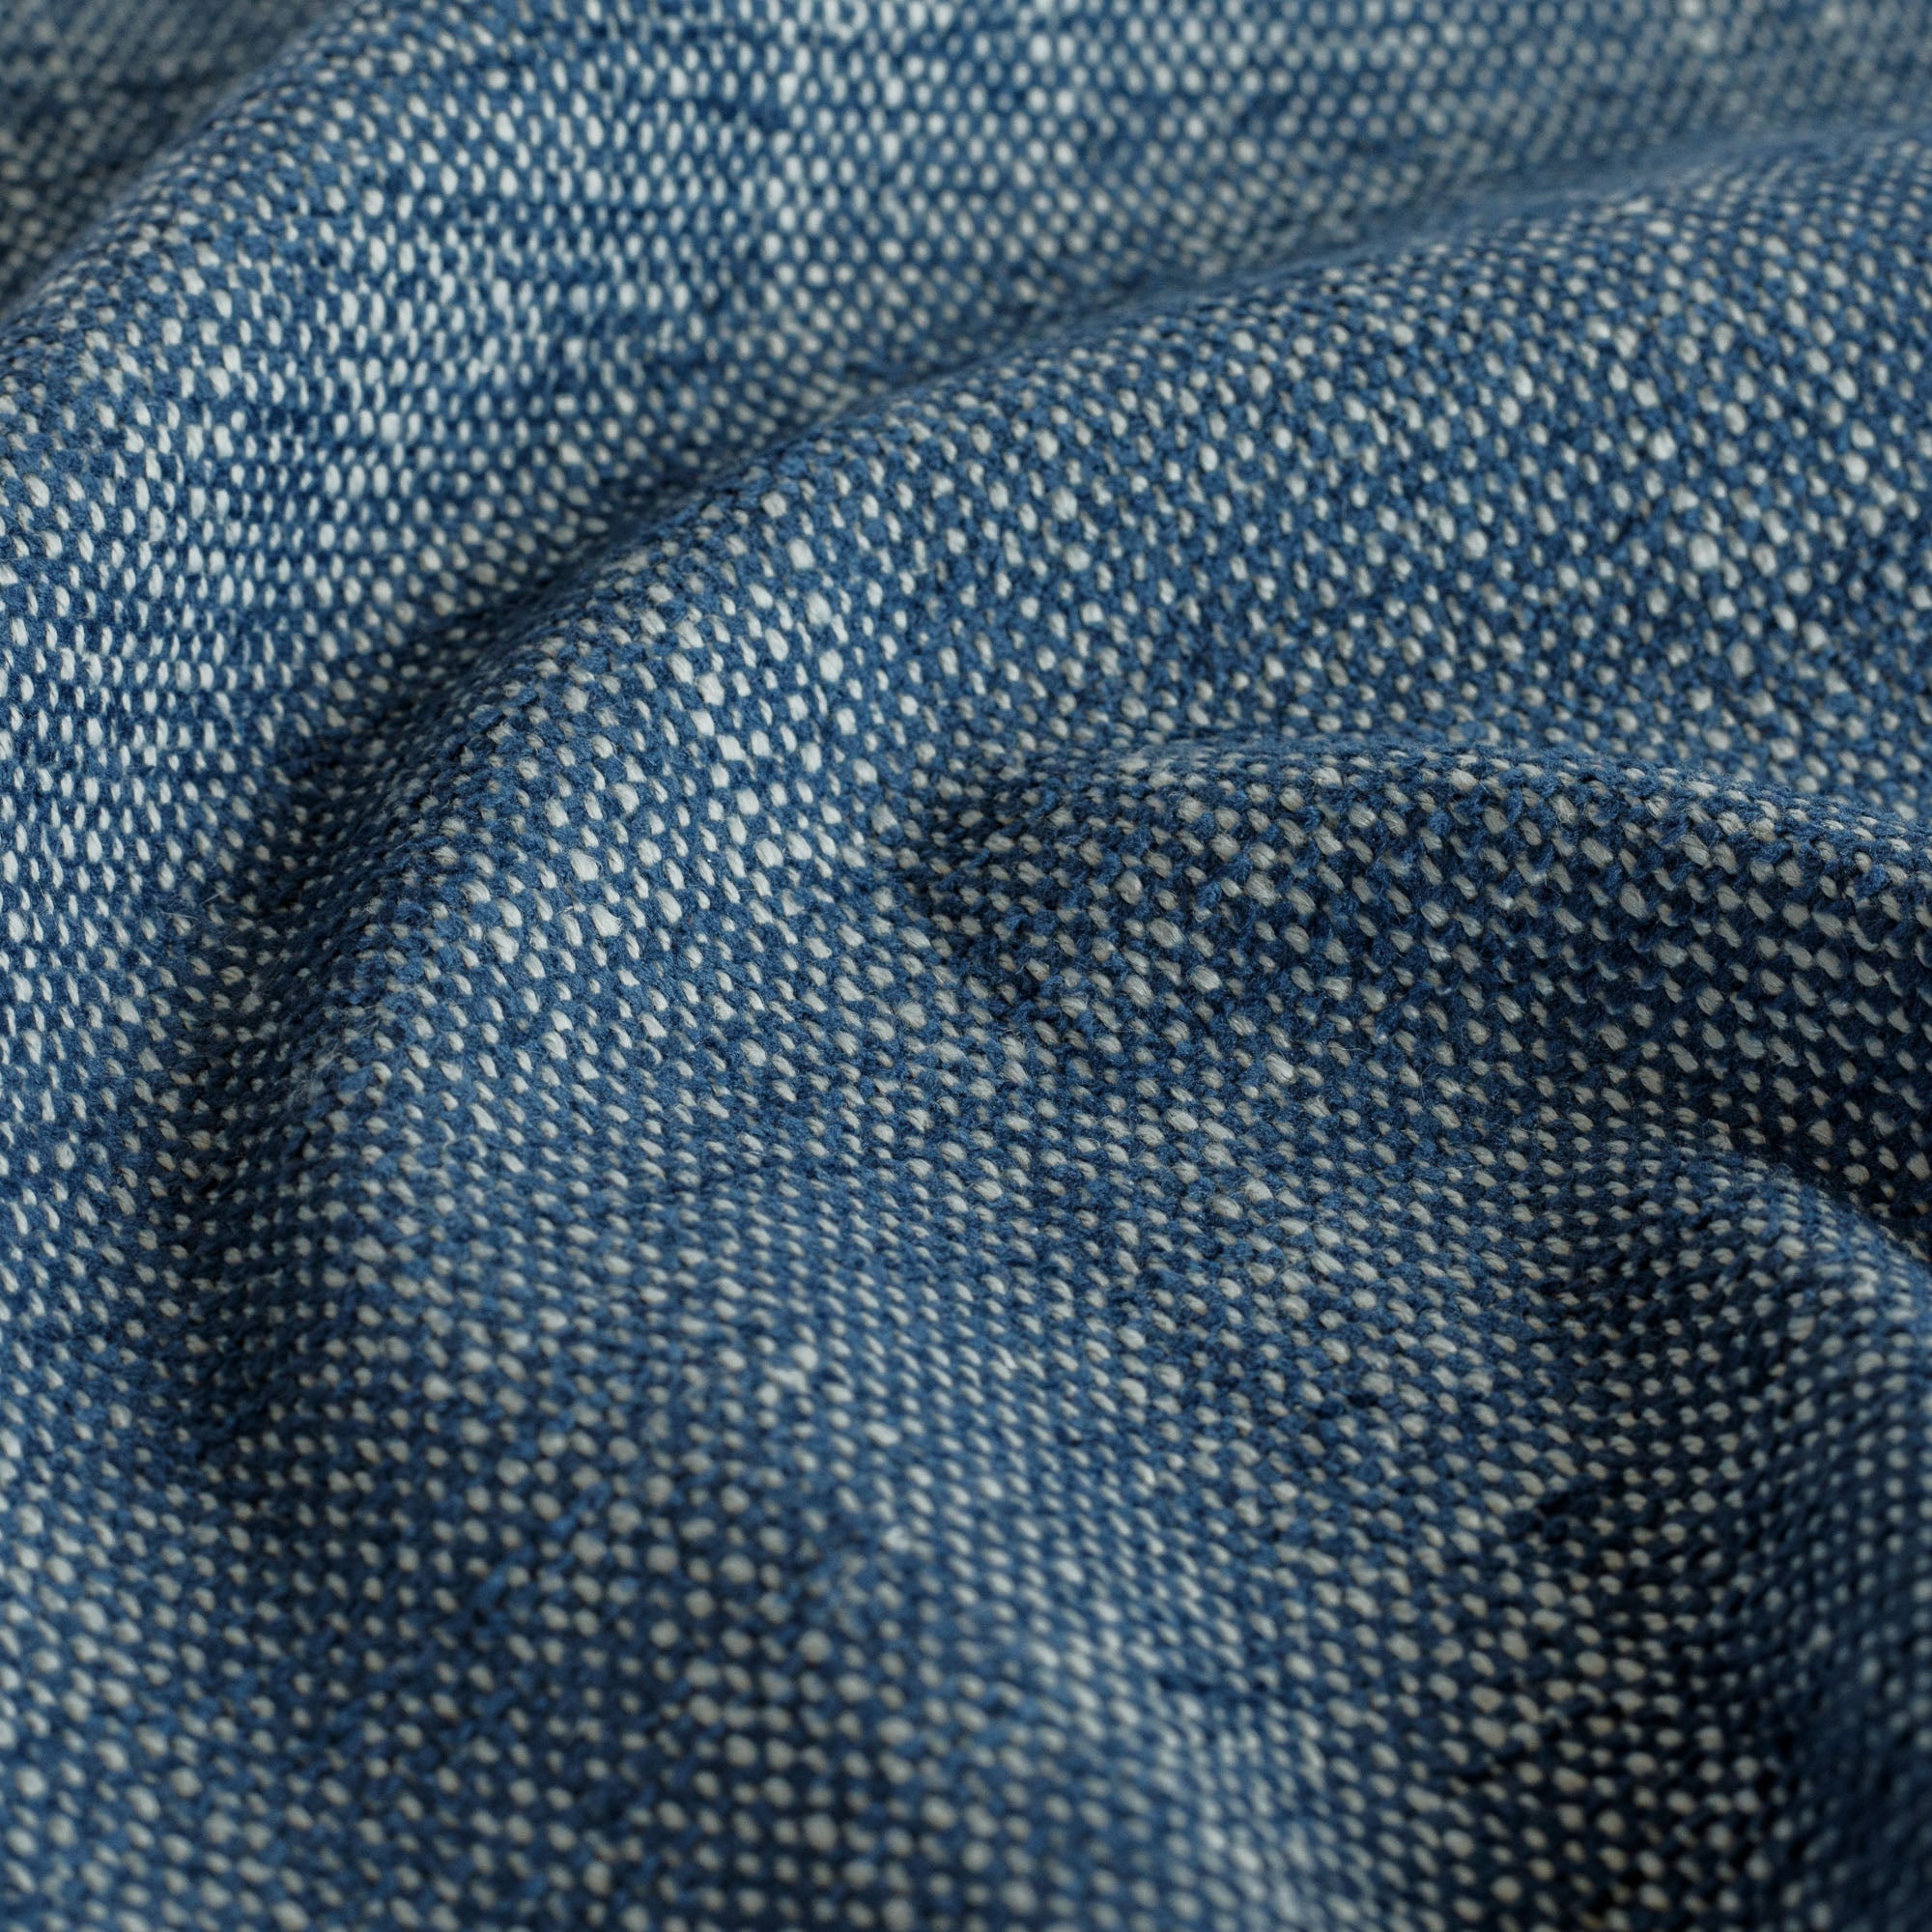 an indigo blue chenille upholstery fabric : close up view